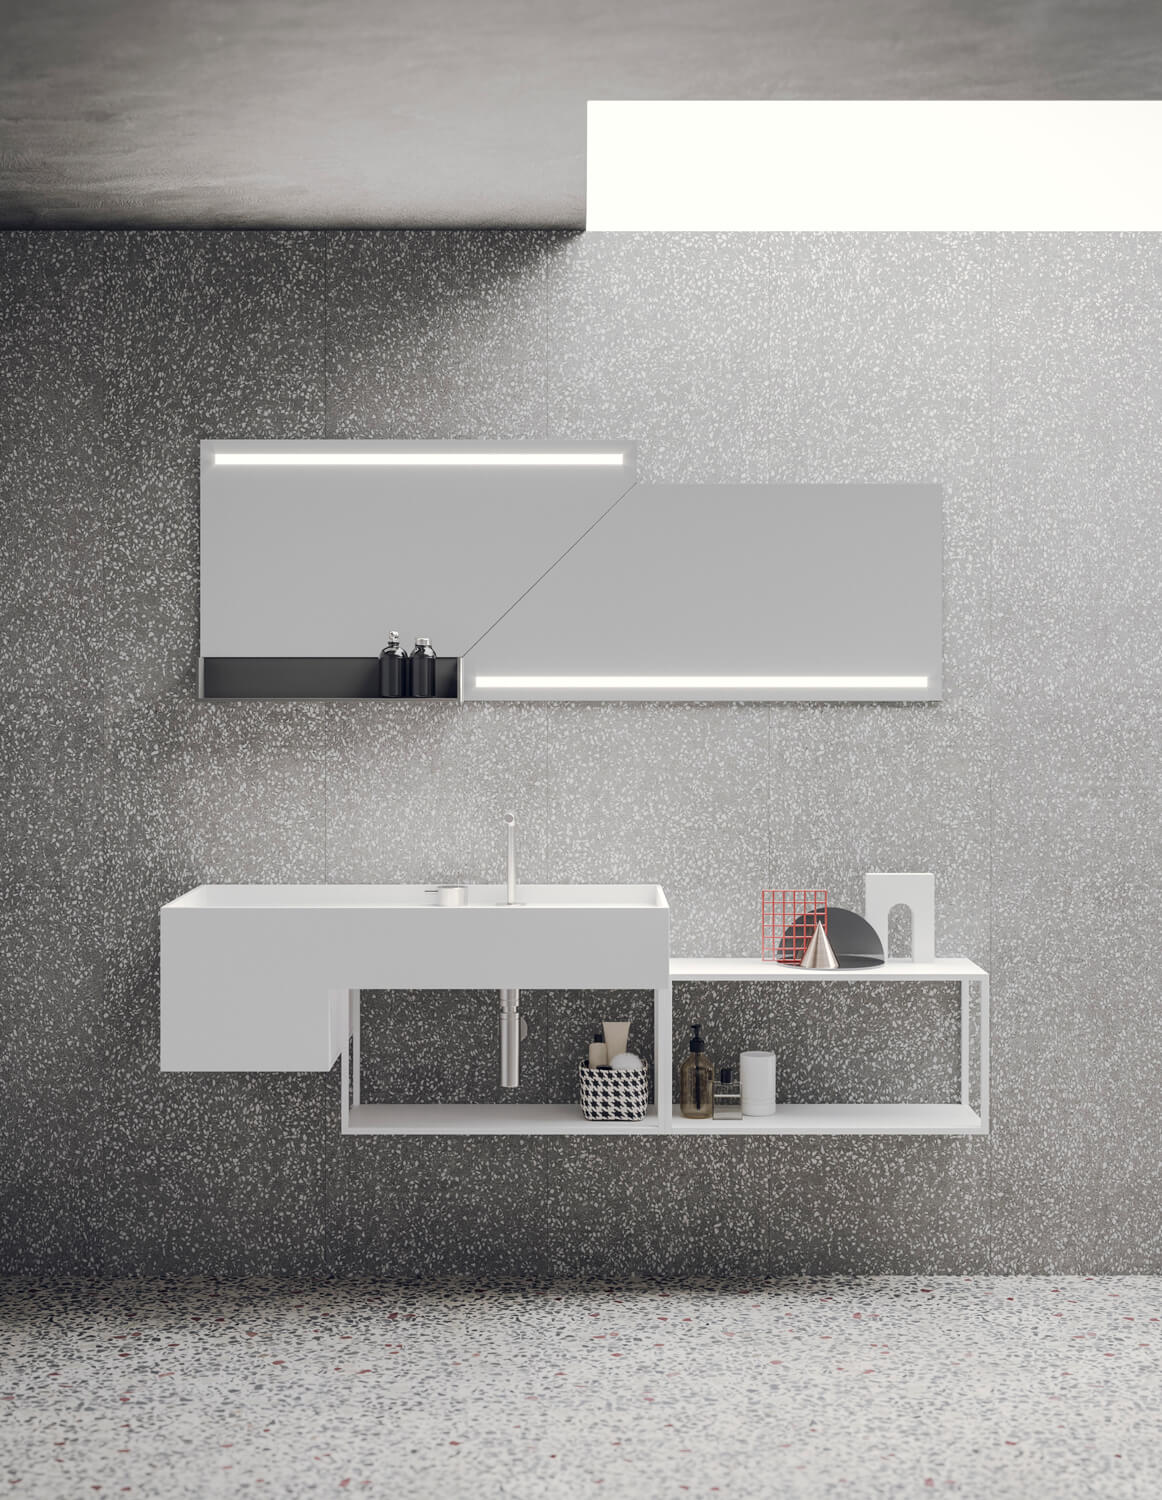 Simple lines, infinite design possibilities. That’s the philosophy of the Libera+ system.